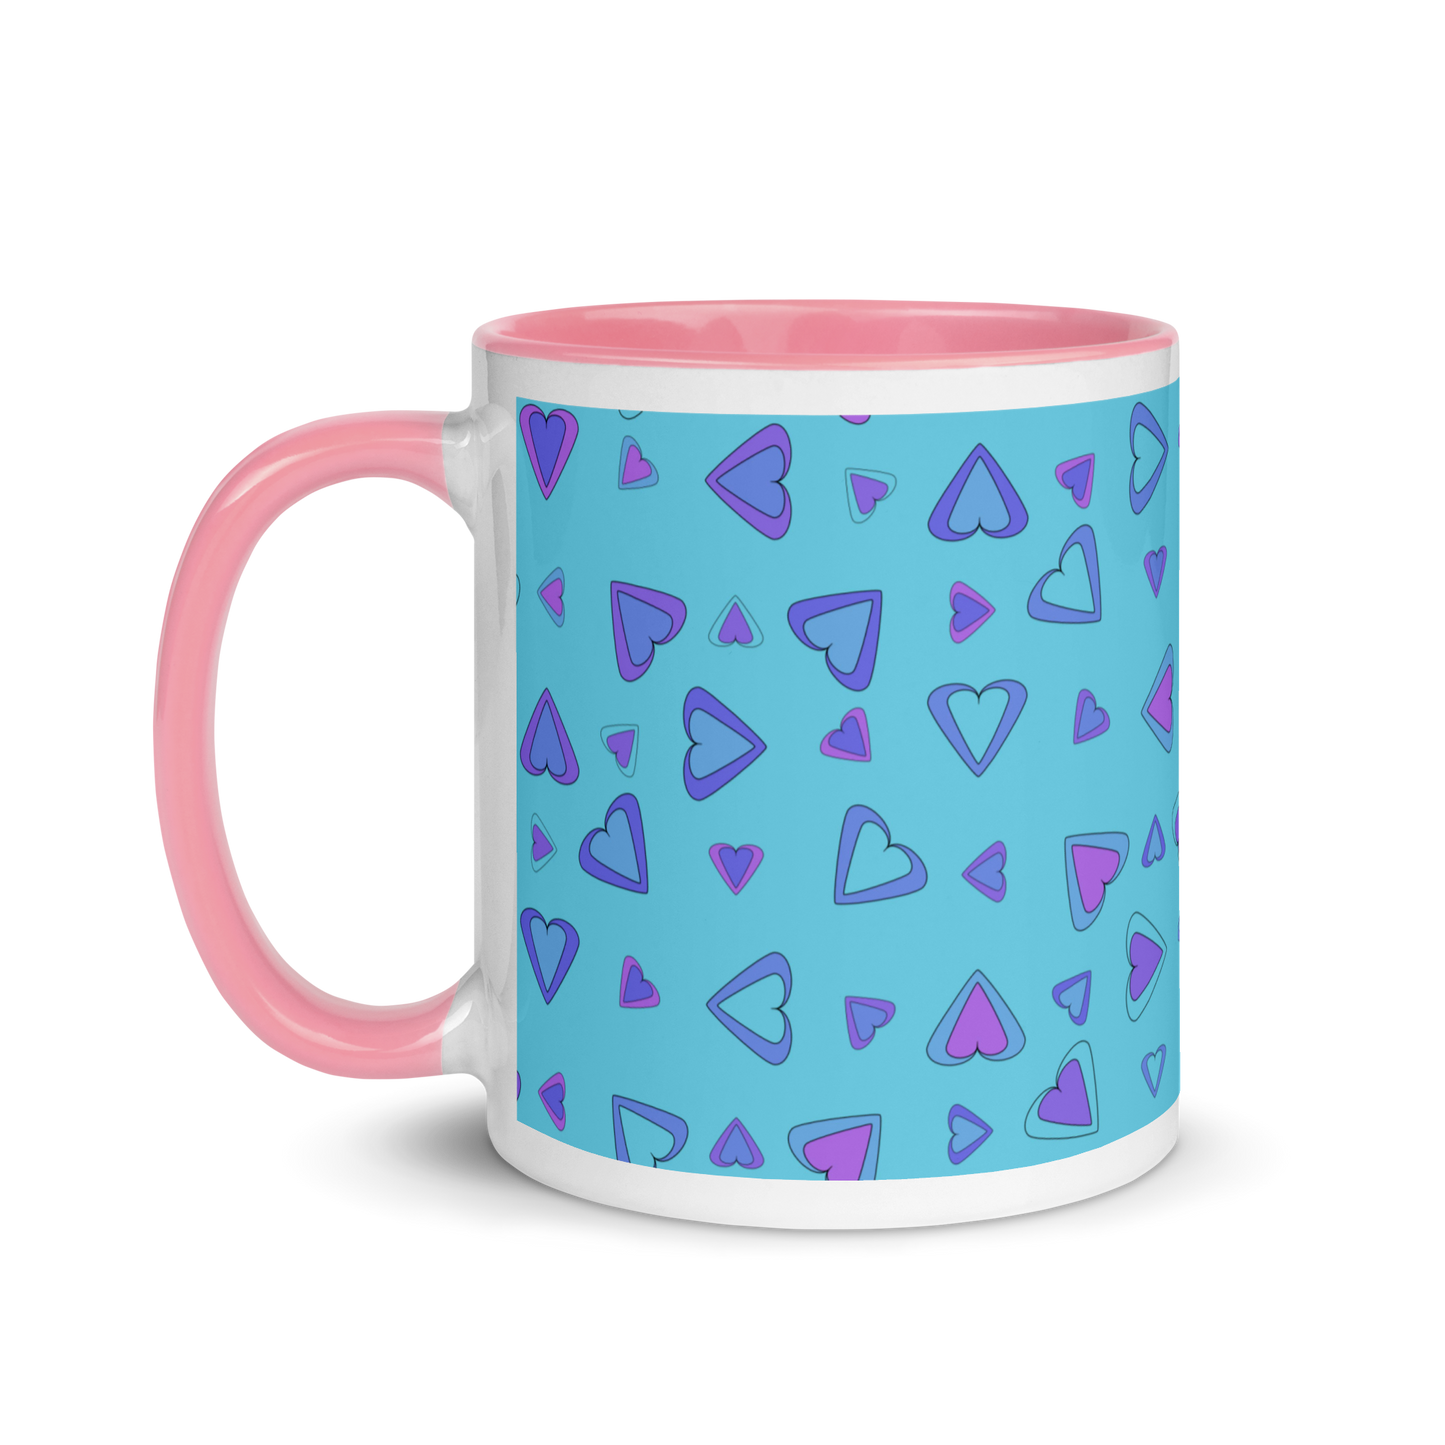 Rainbow Of Hearts | Batch 01 | Seamless Patterns | White Ceramic Mug with Color Inside - #9